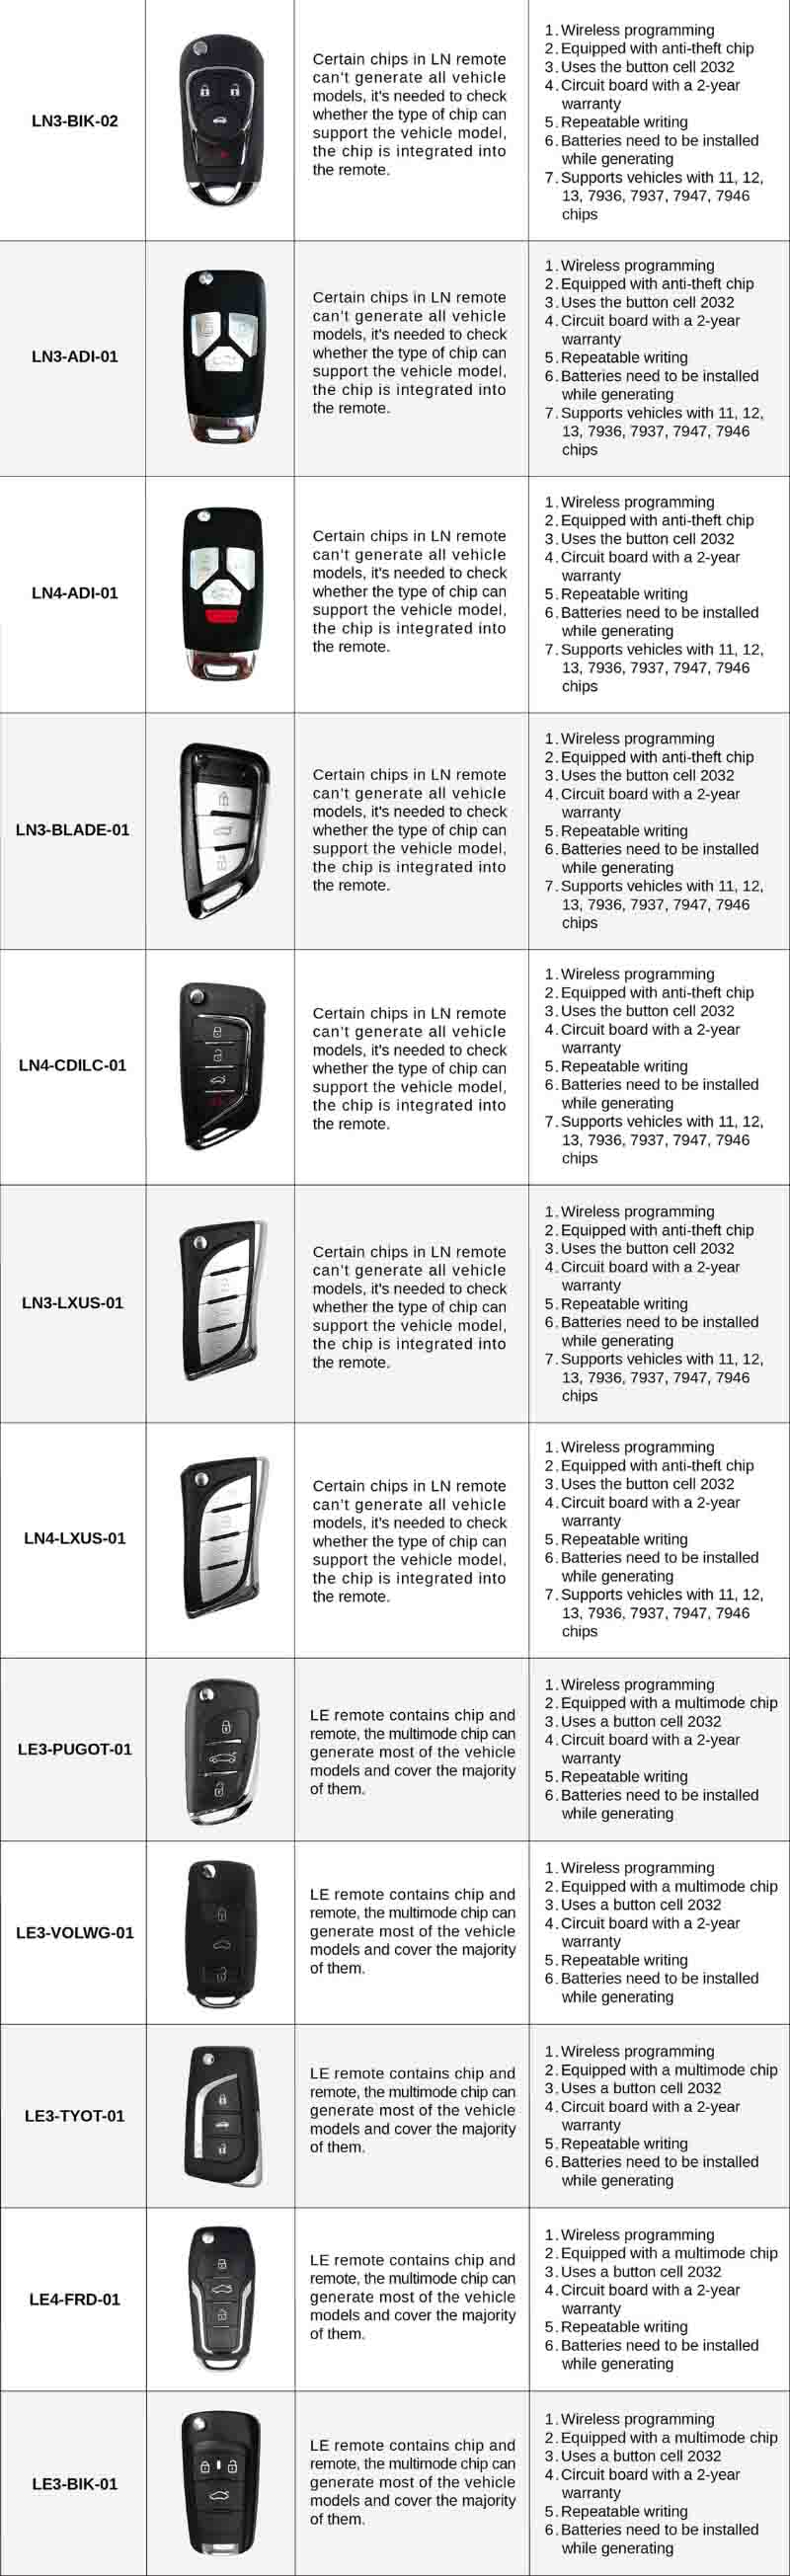 how-to-use-launch-x431-key-programmer-and-universal-car-keys-14